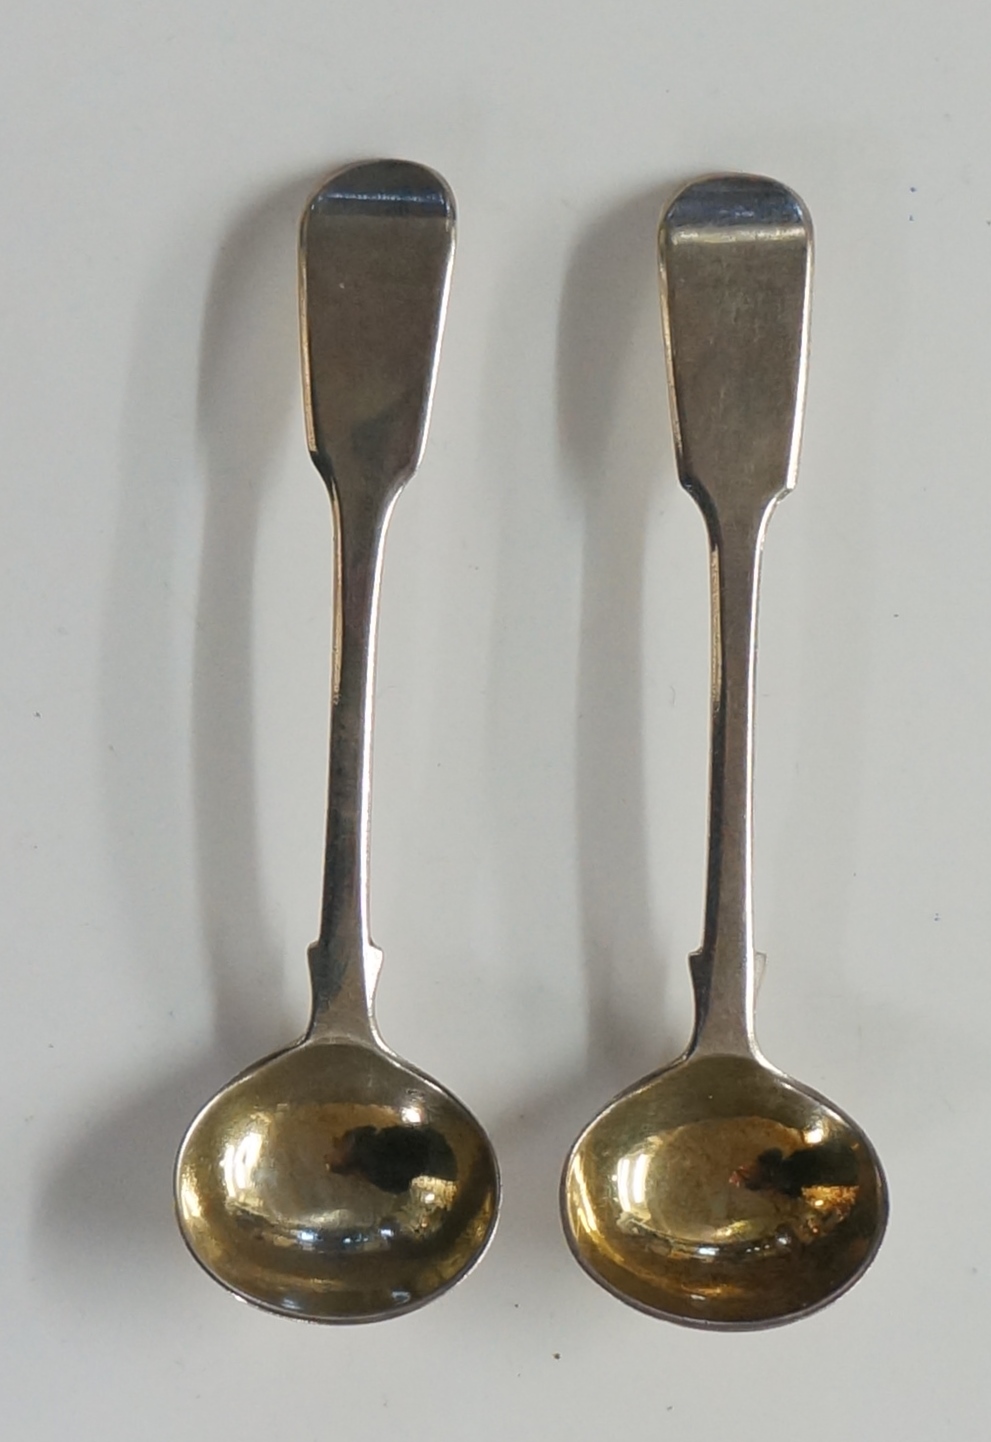 A pair of William IV fiddle pattern mustard spoons with gilded bowls, by Mary Chawner, London 1836,